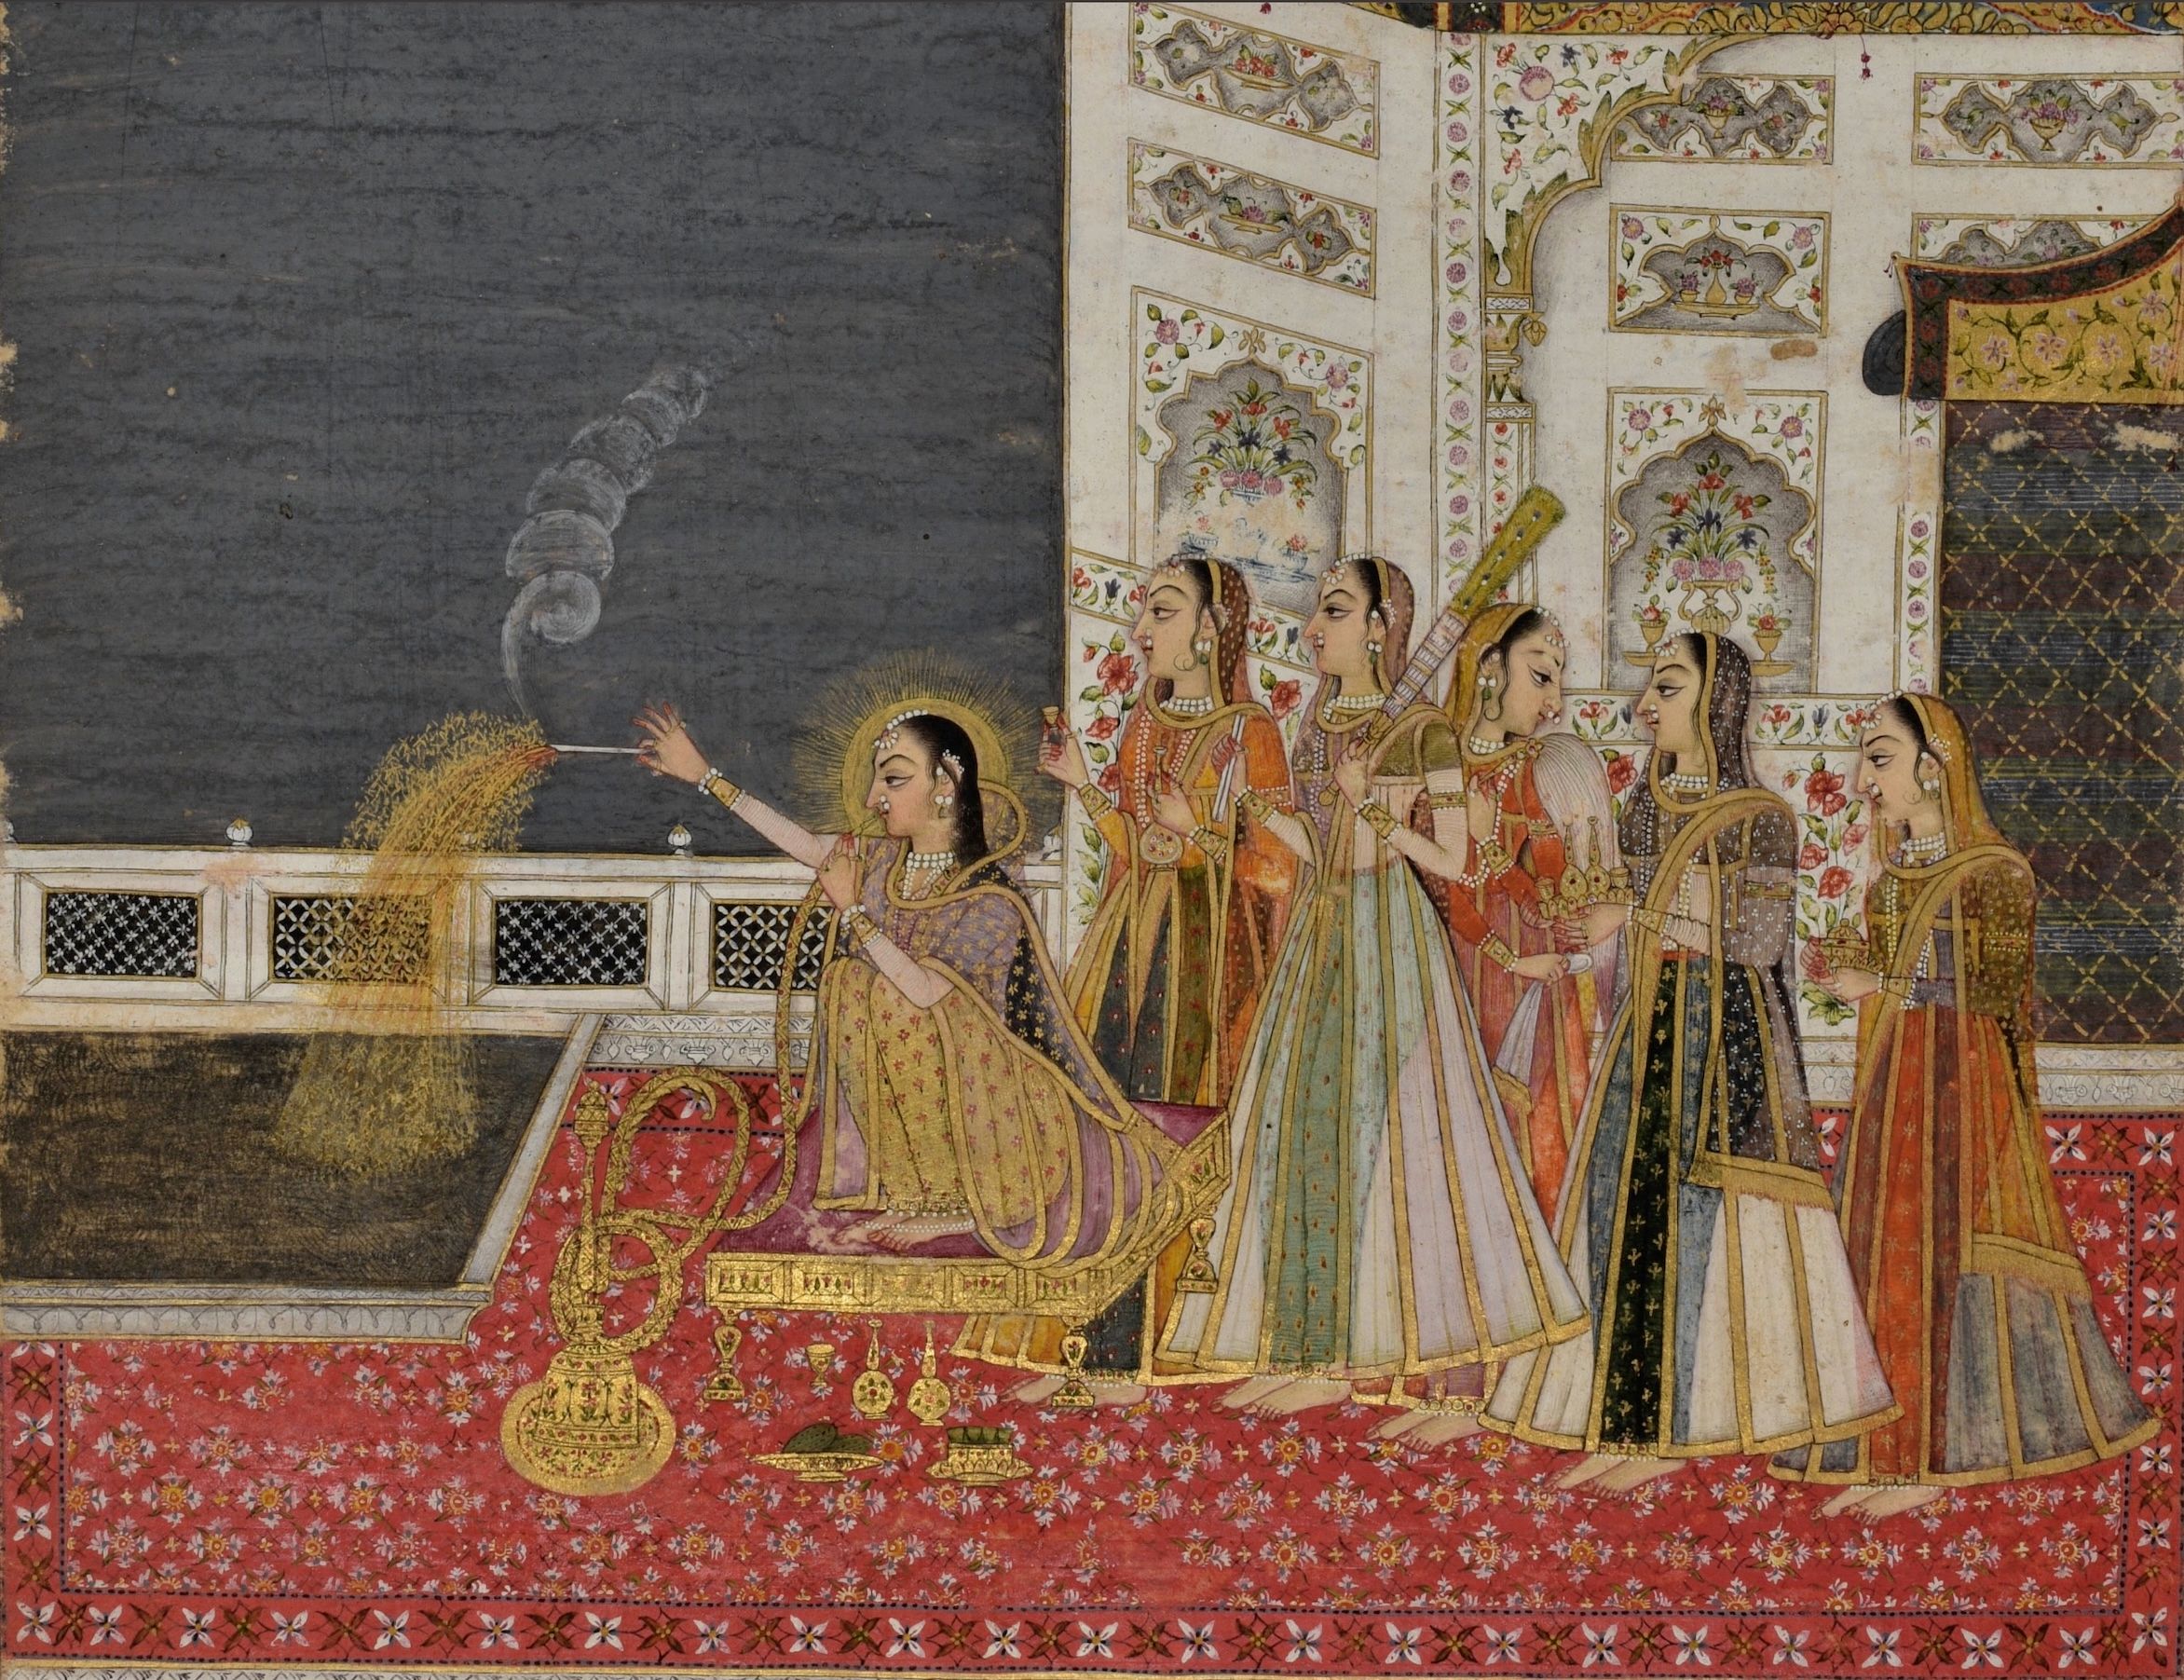 A Diwali painting from Mughal times showing a noblewoman with her consorts enjoying a hookah and sparklers